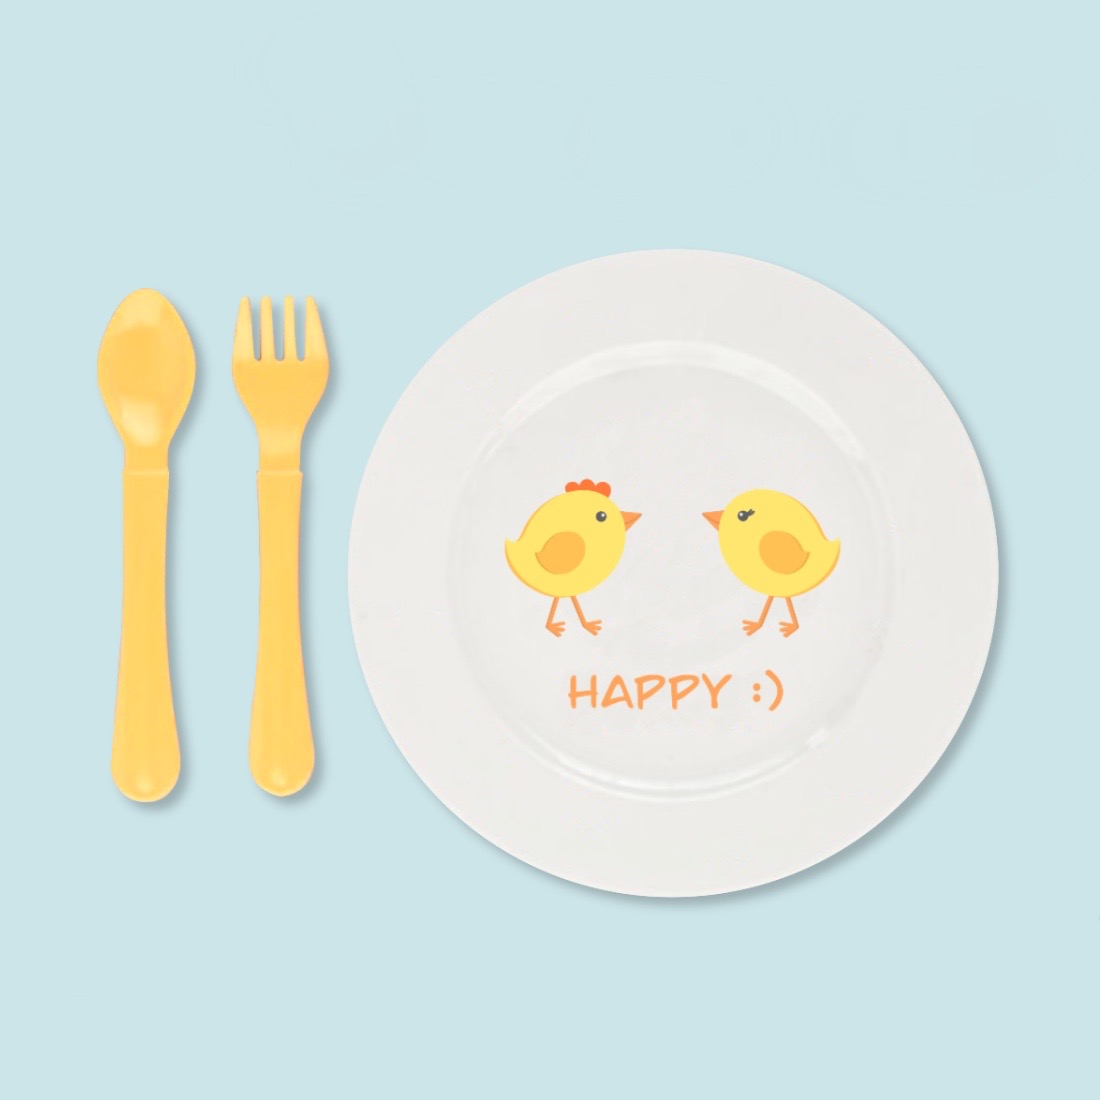 Cute Plate Chickens and Hearts Poster Seamless Pattern Preview image.